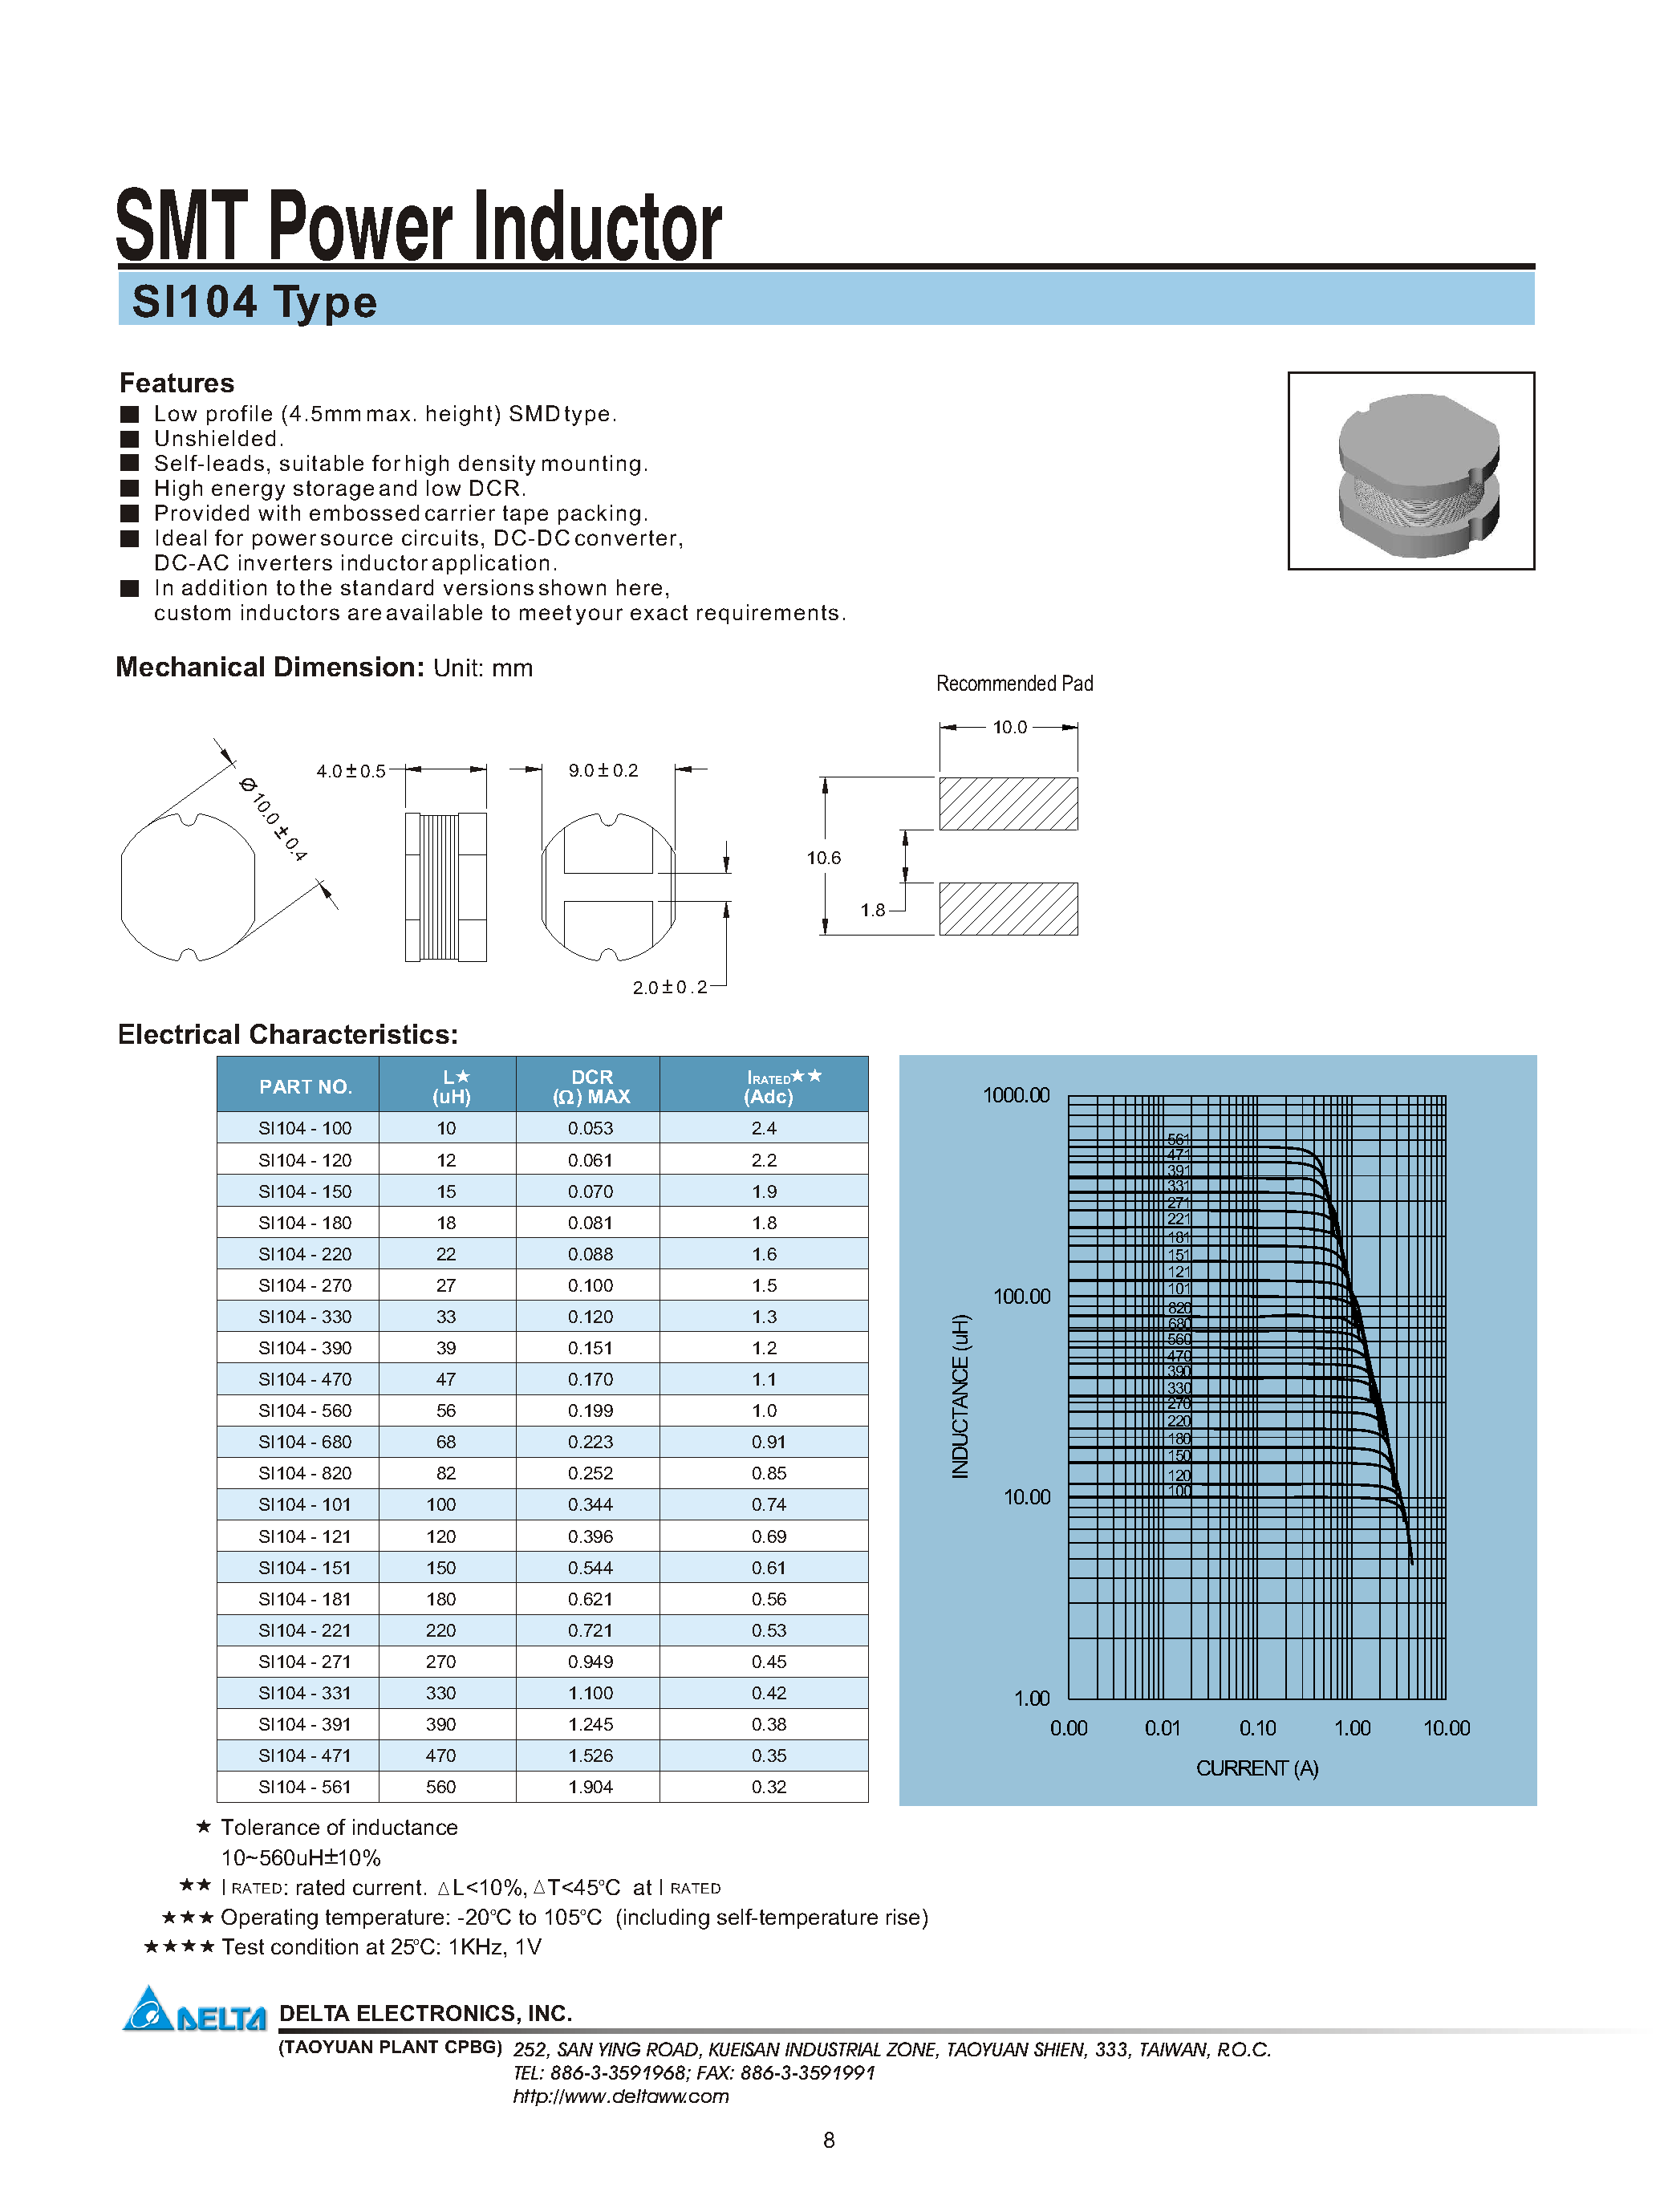 Datasheet SI104-561 - SMT Power Inductor page 1